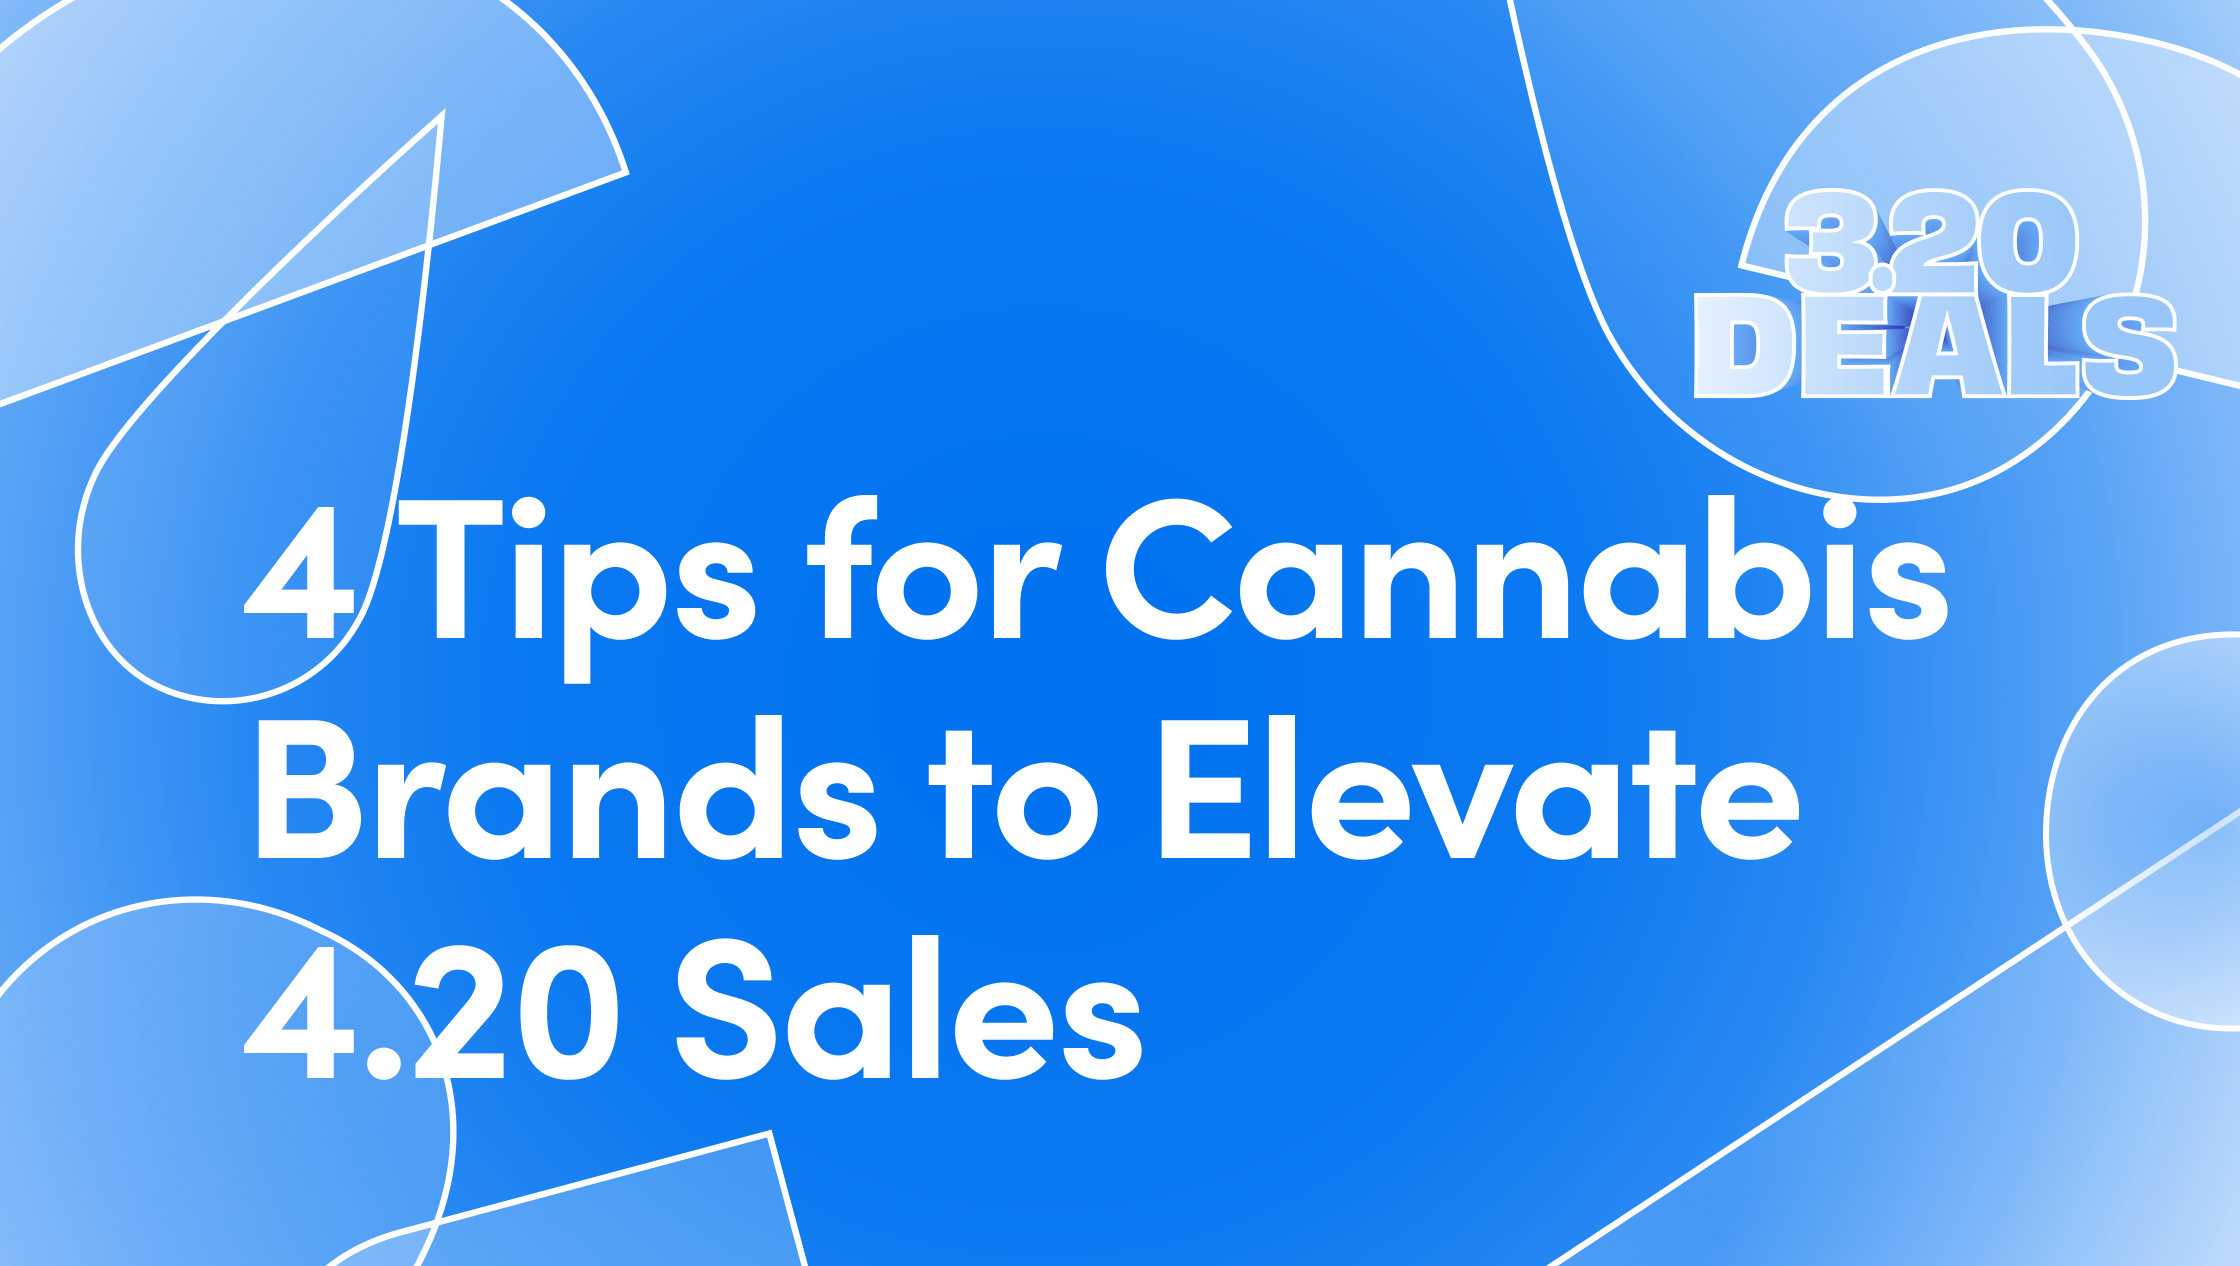 4 Tips for Cannabis Brands to Elevate 4.20 Sales